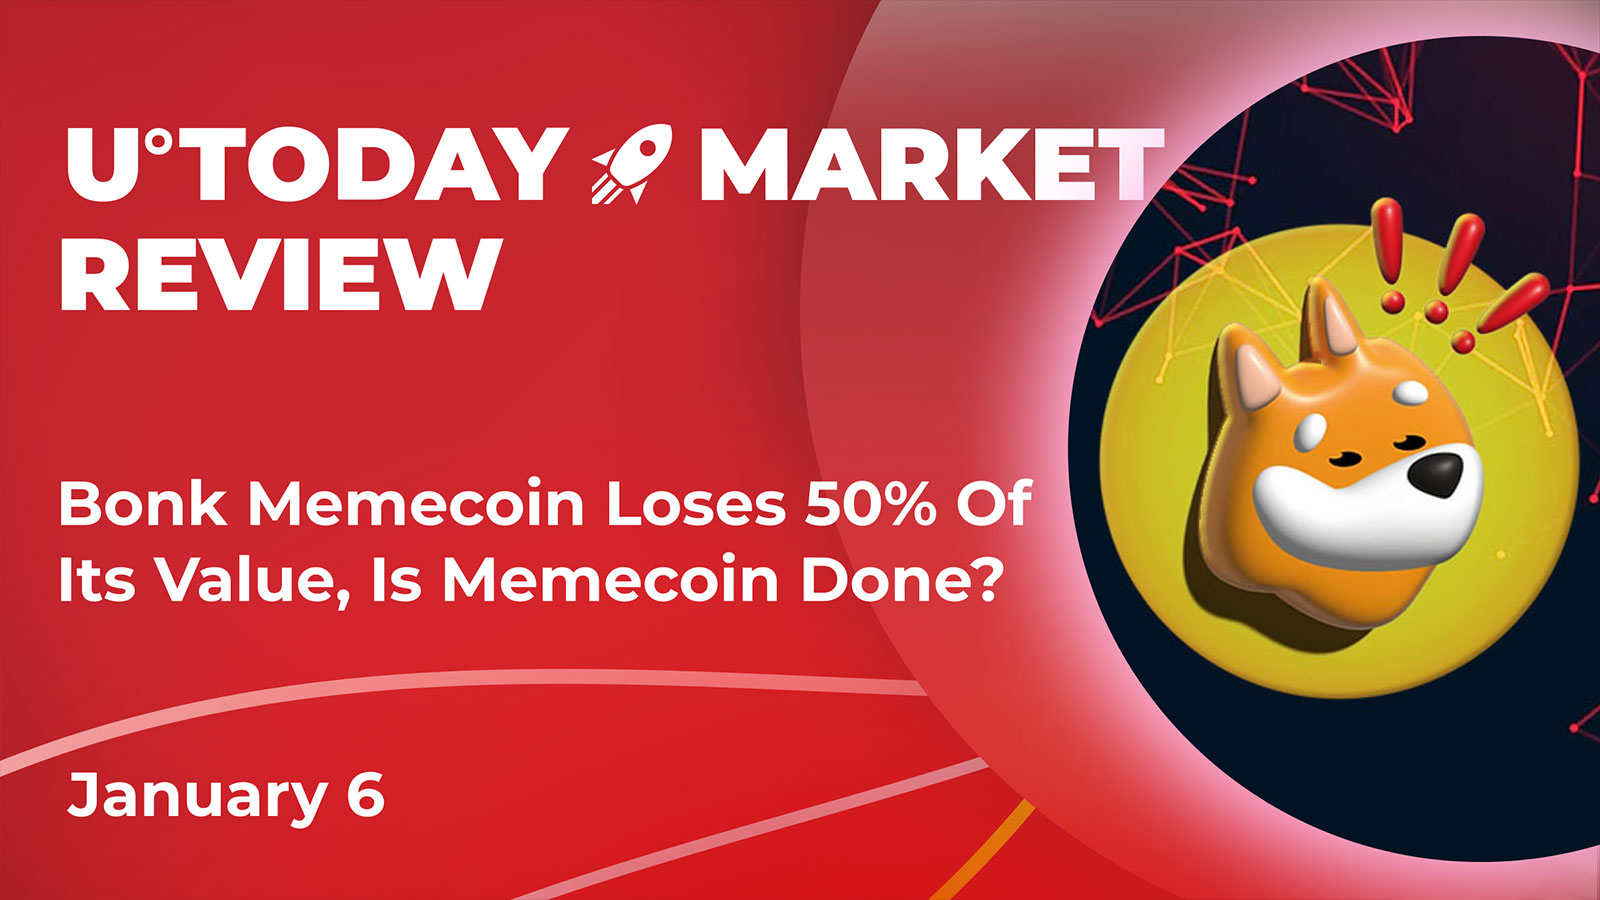 Bonk Memecoin Loses 50% Of Its Value, Is Memecoin Done? Crypto Market Review, Jan. 6